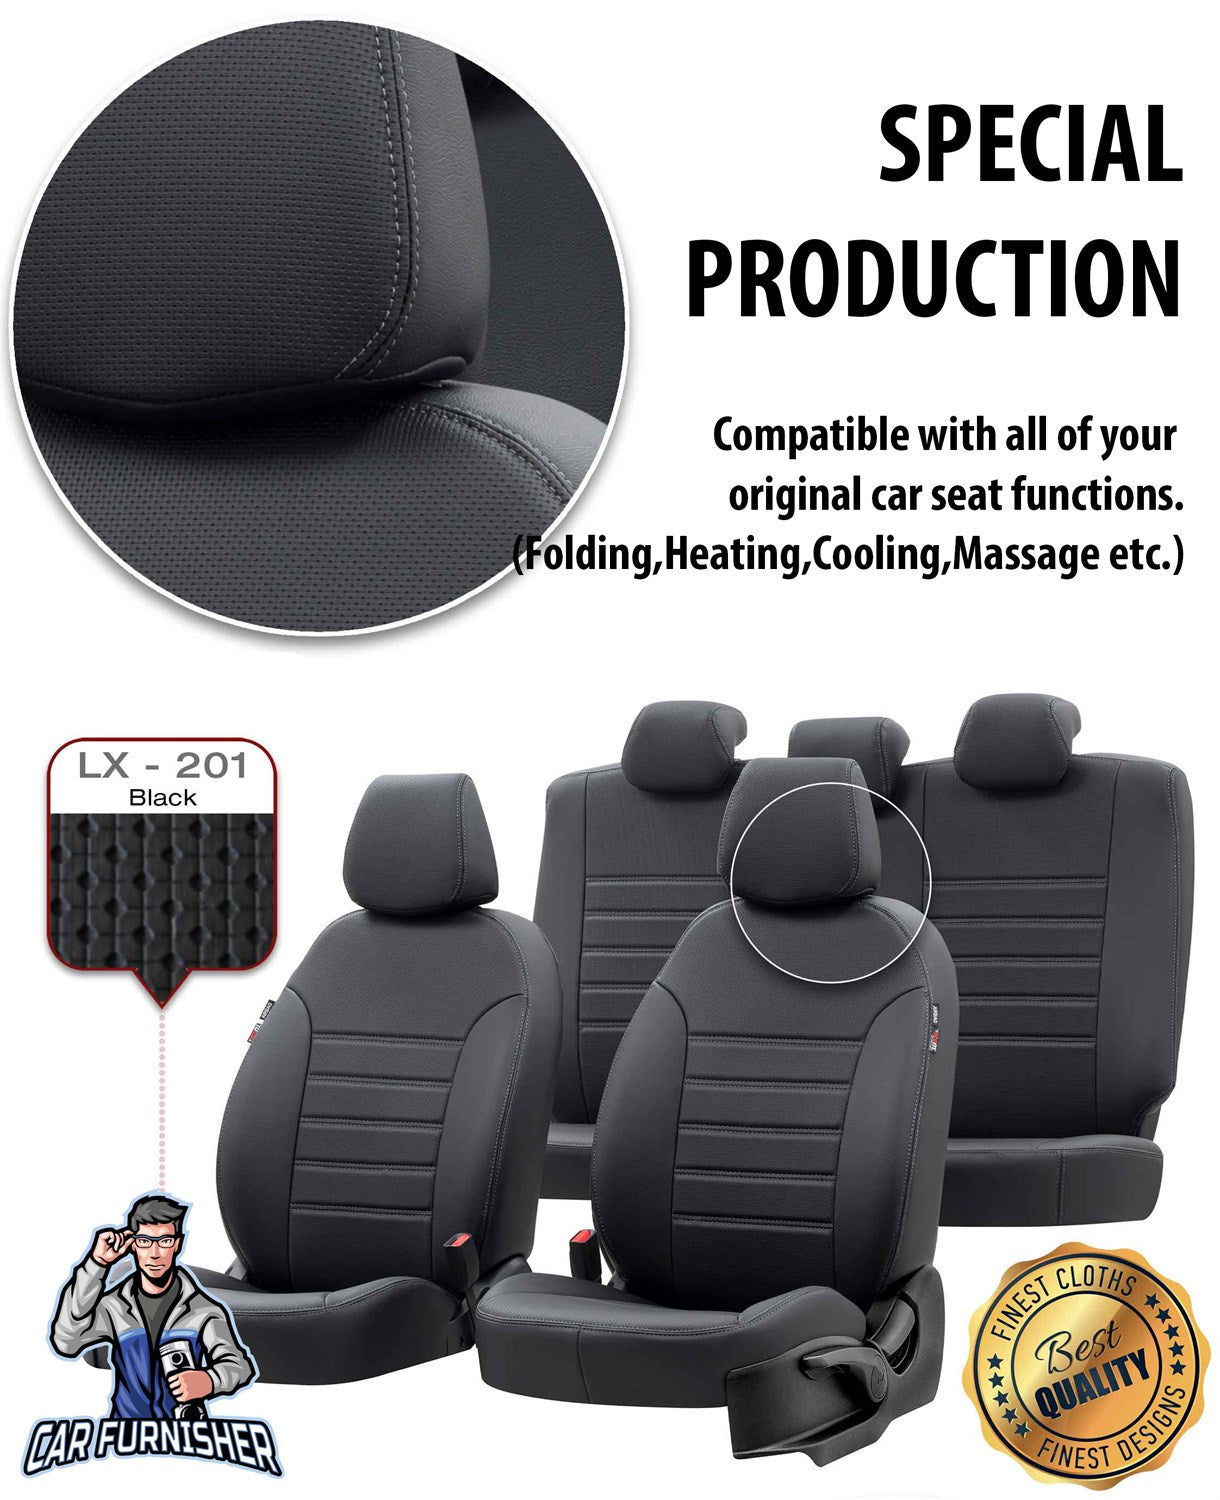 Seat Alhambra Seat Covers New York Leather Design Smoked Leather